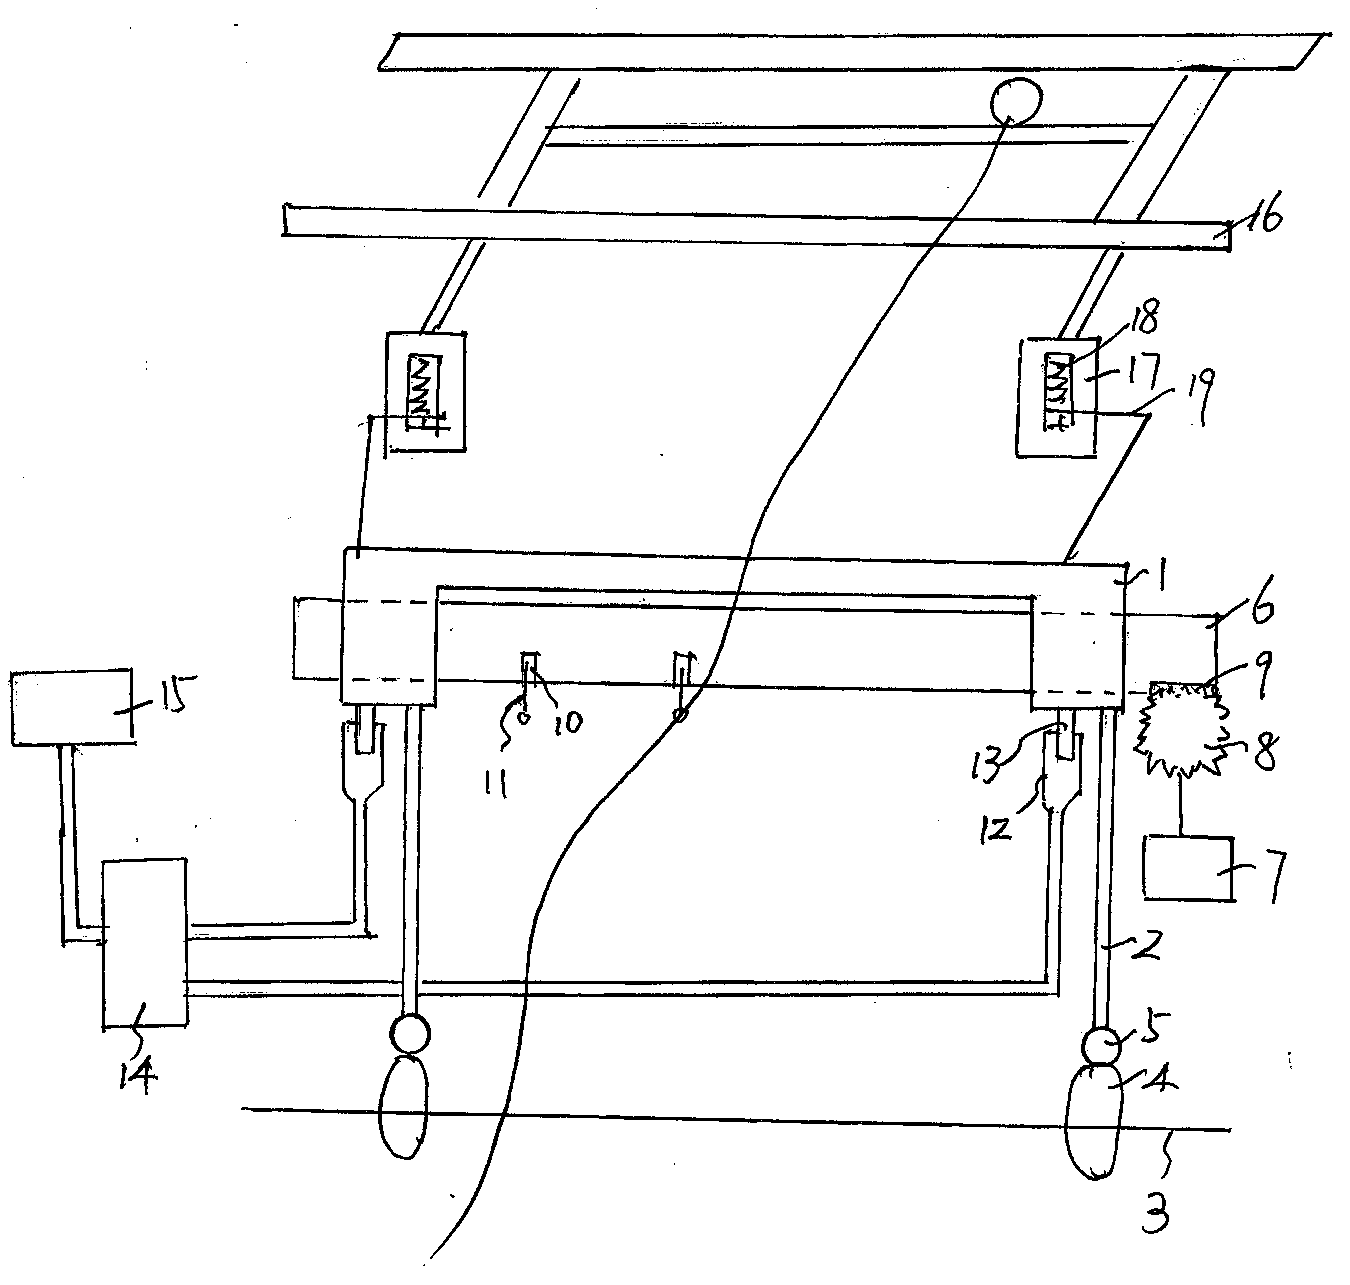 High-precision control method for float weaving